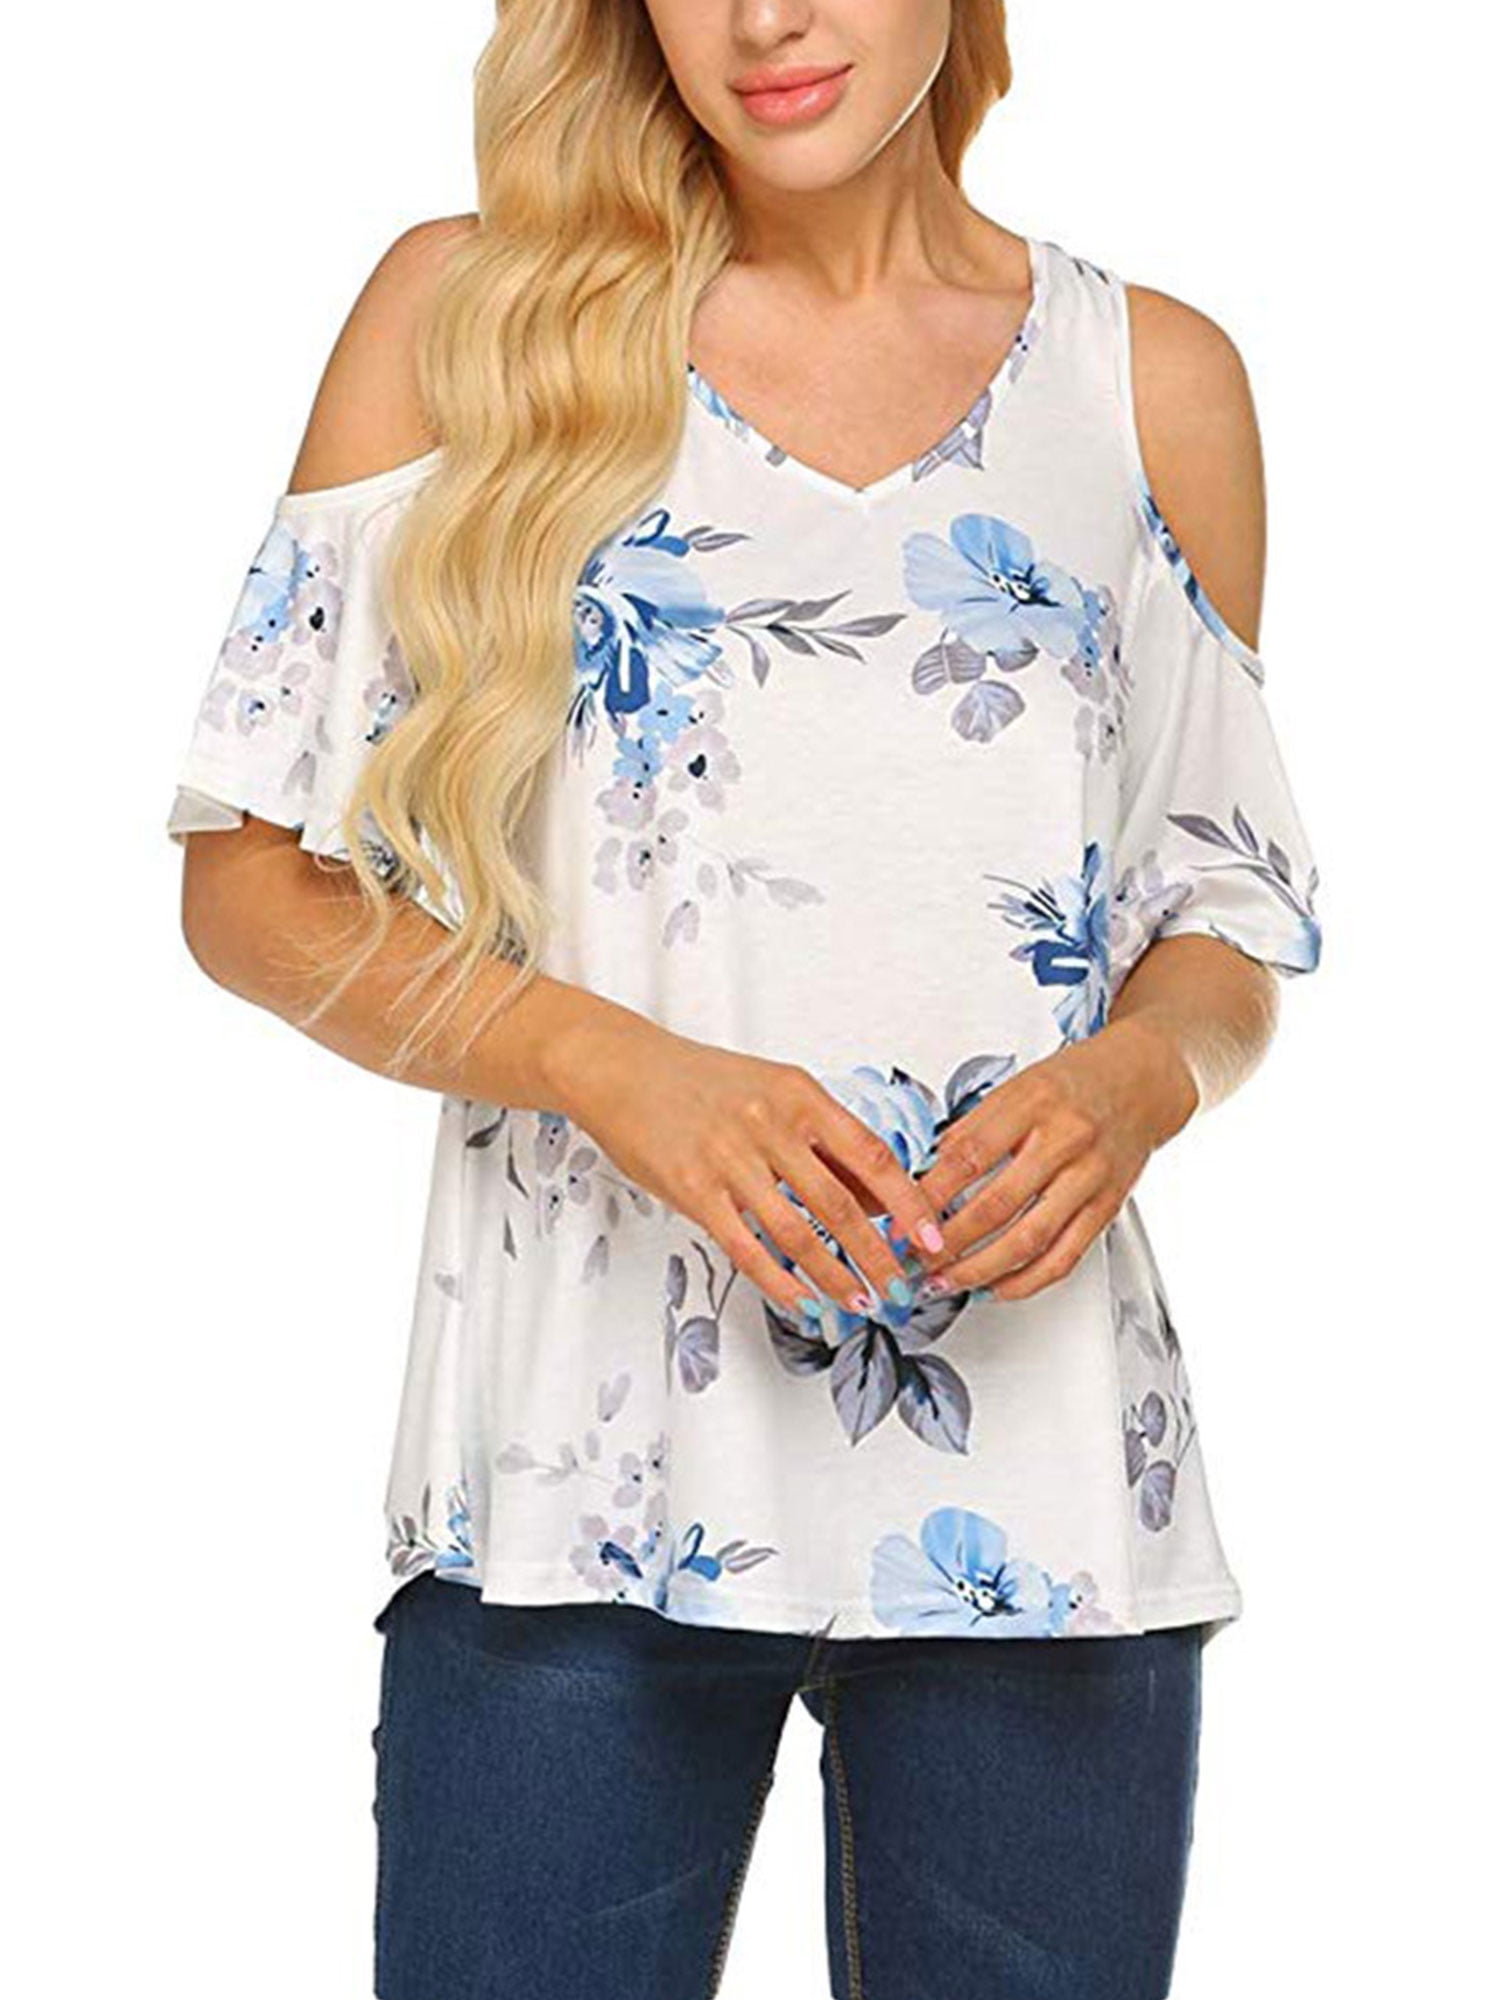 Tops for Women Summer,Womens Casual Summer T Shirts Tie Dye Print Short Sleeve Tunic Criss Cross Strappy Cold Shoulder Tops